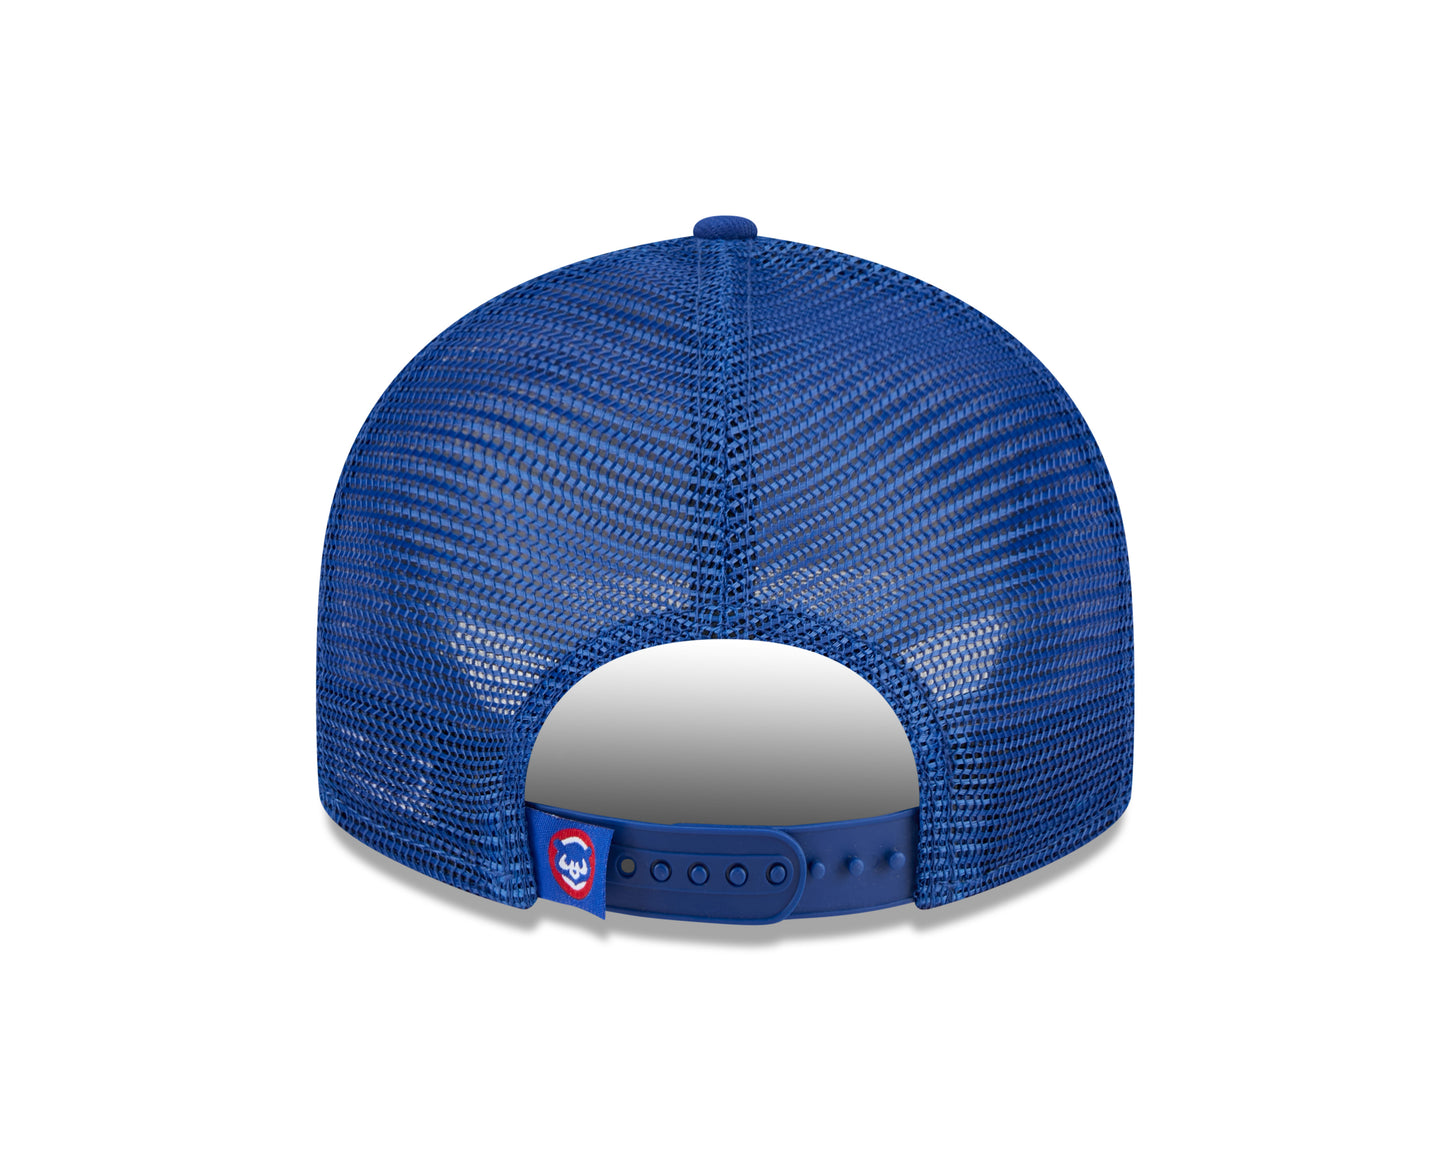 Chicago Cubs New Era Royal Blue Coopertown 79 Trucker Low Profile 9FIFTY Snapback Adjustable Hat